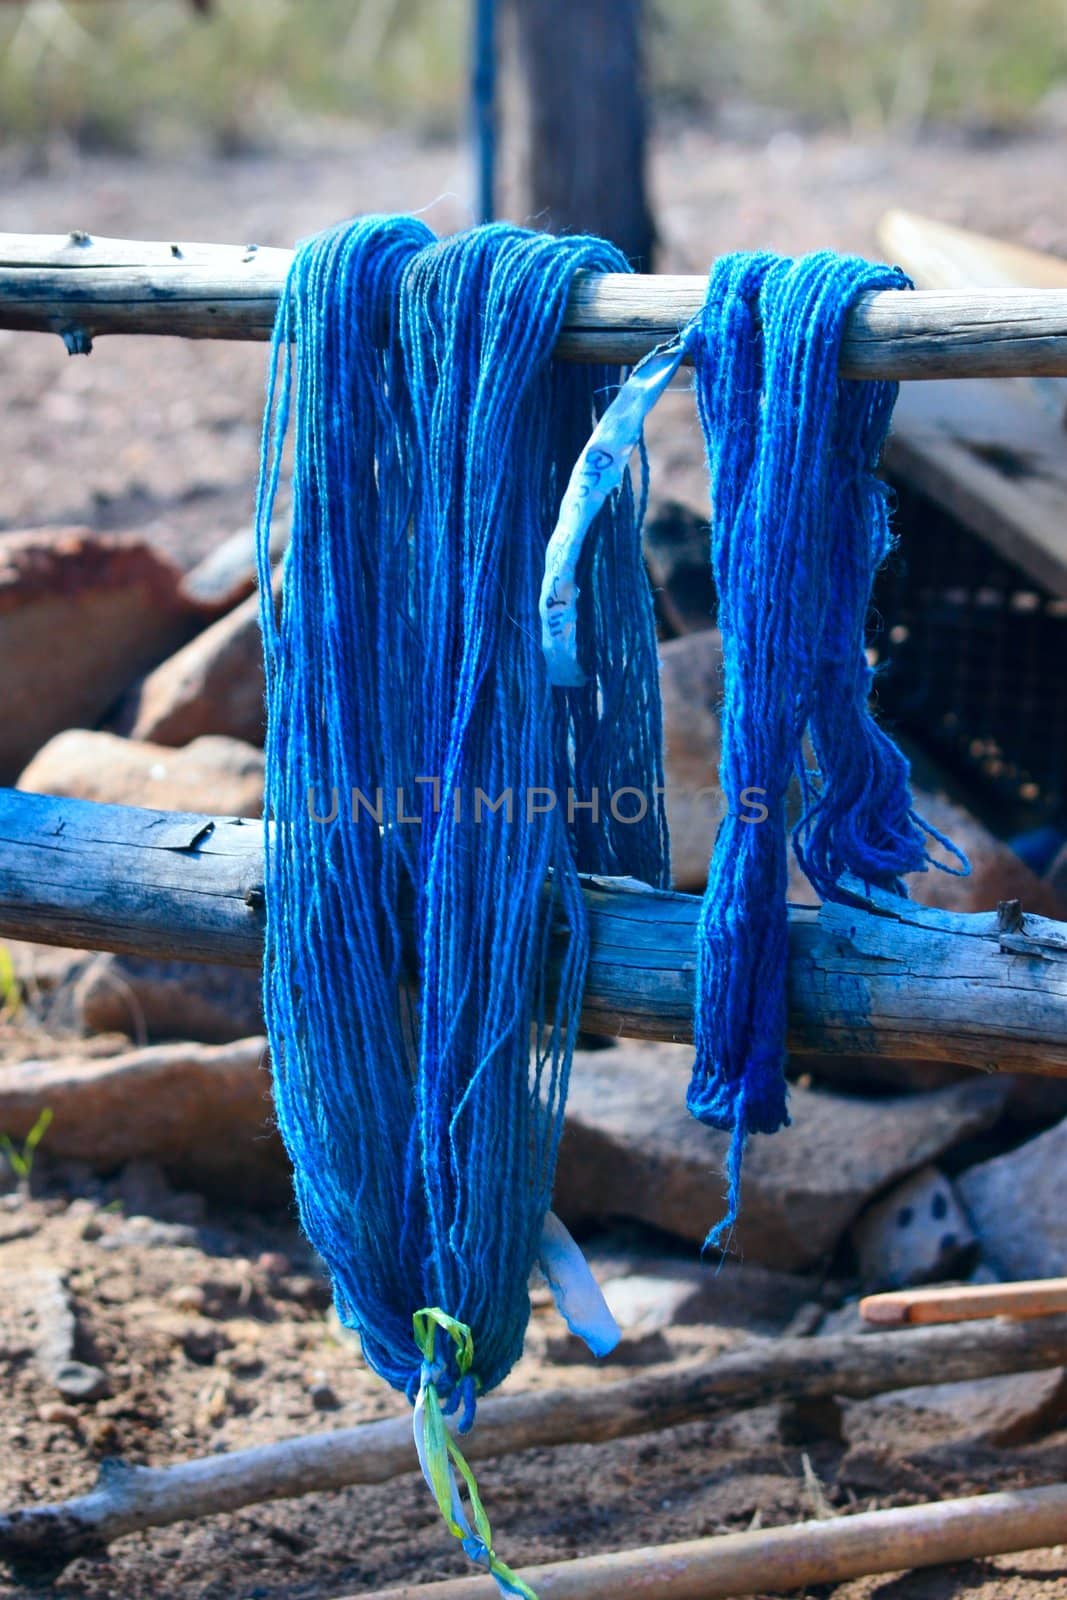 Natural dyed, handspun skeins of yarn, hanging on a corral fence pole to dry.  The blue hue is particularly difficult to achieve through natural methods and is highly prized. 